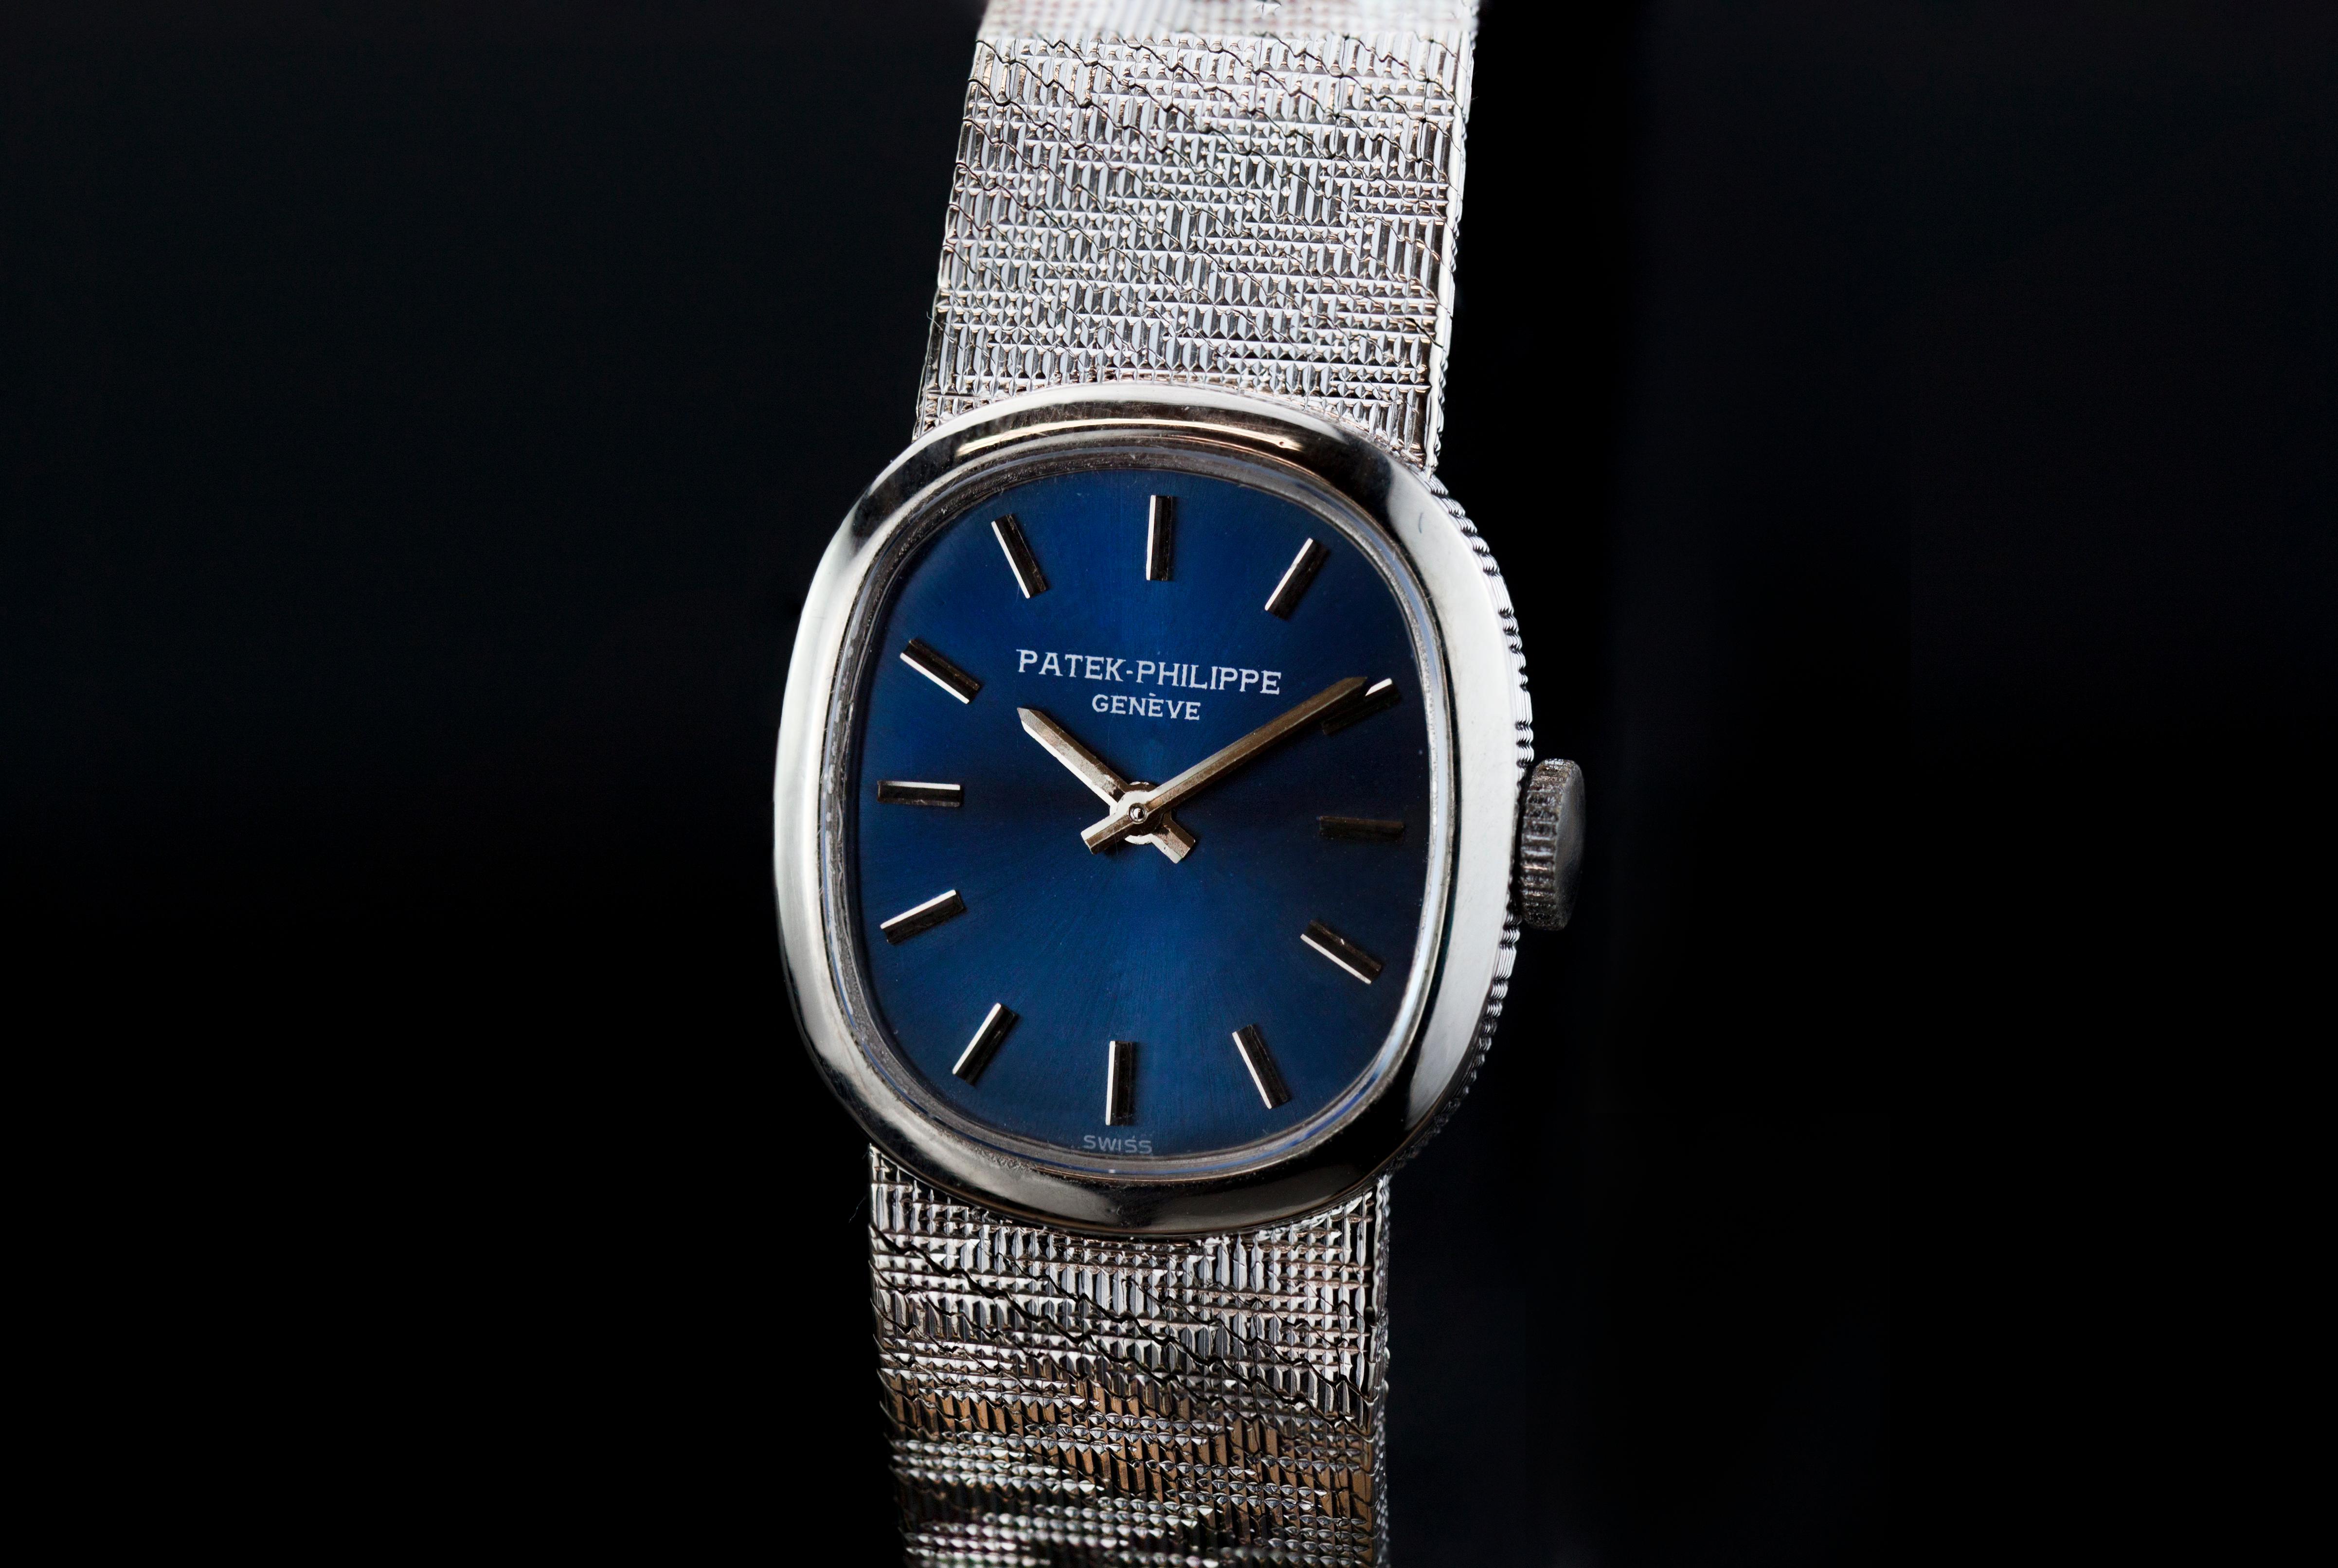 Launched in 1973, the ‘Mini-Ellipse’ ref. 4226 was a bestselling watch of the Patek Philippe line well into the 1980s. The reference was available in yellow gold and white gold with a multitude of dial, strap and bracelet options.

This example